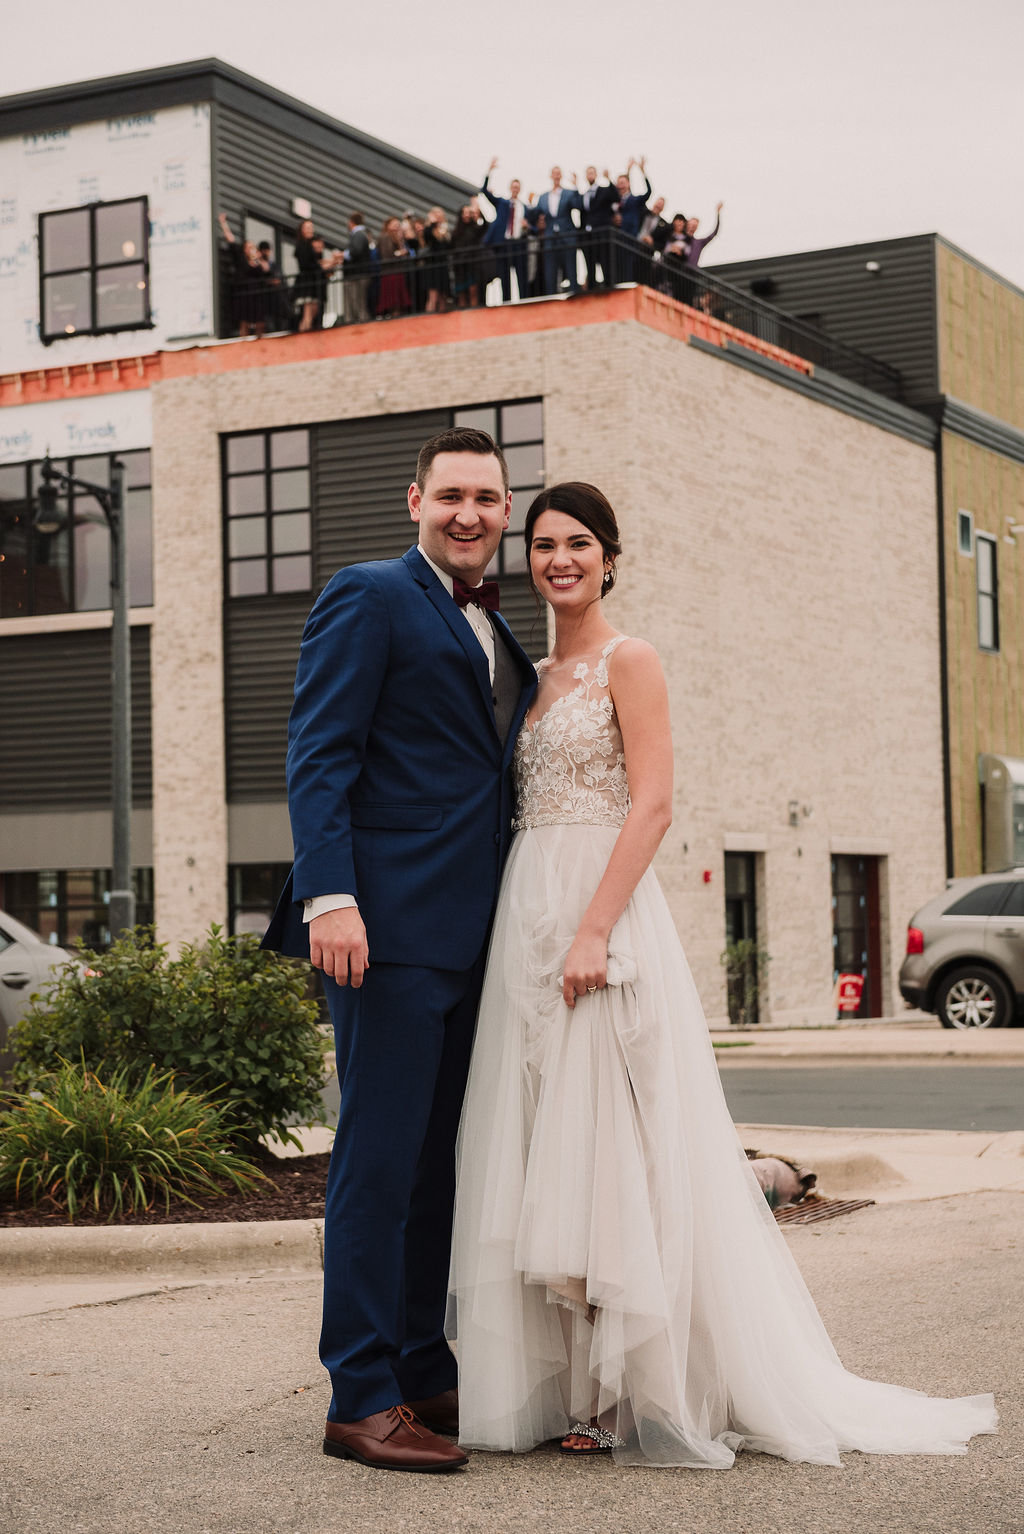 Bride and groom posing on the ground with party on the rooftop